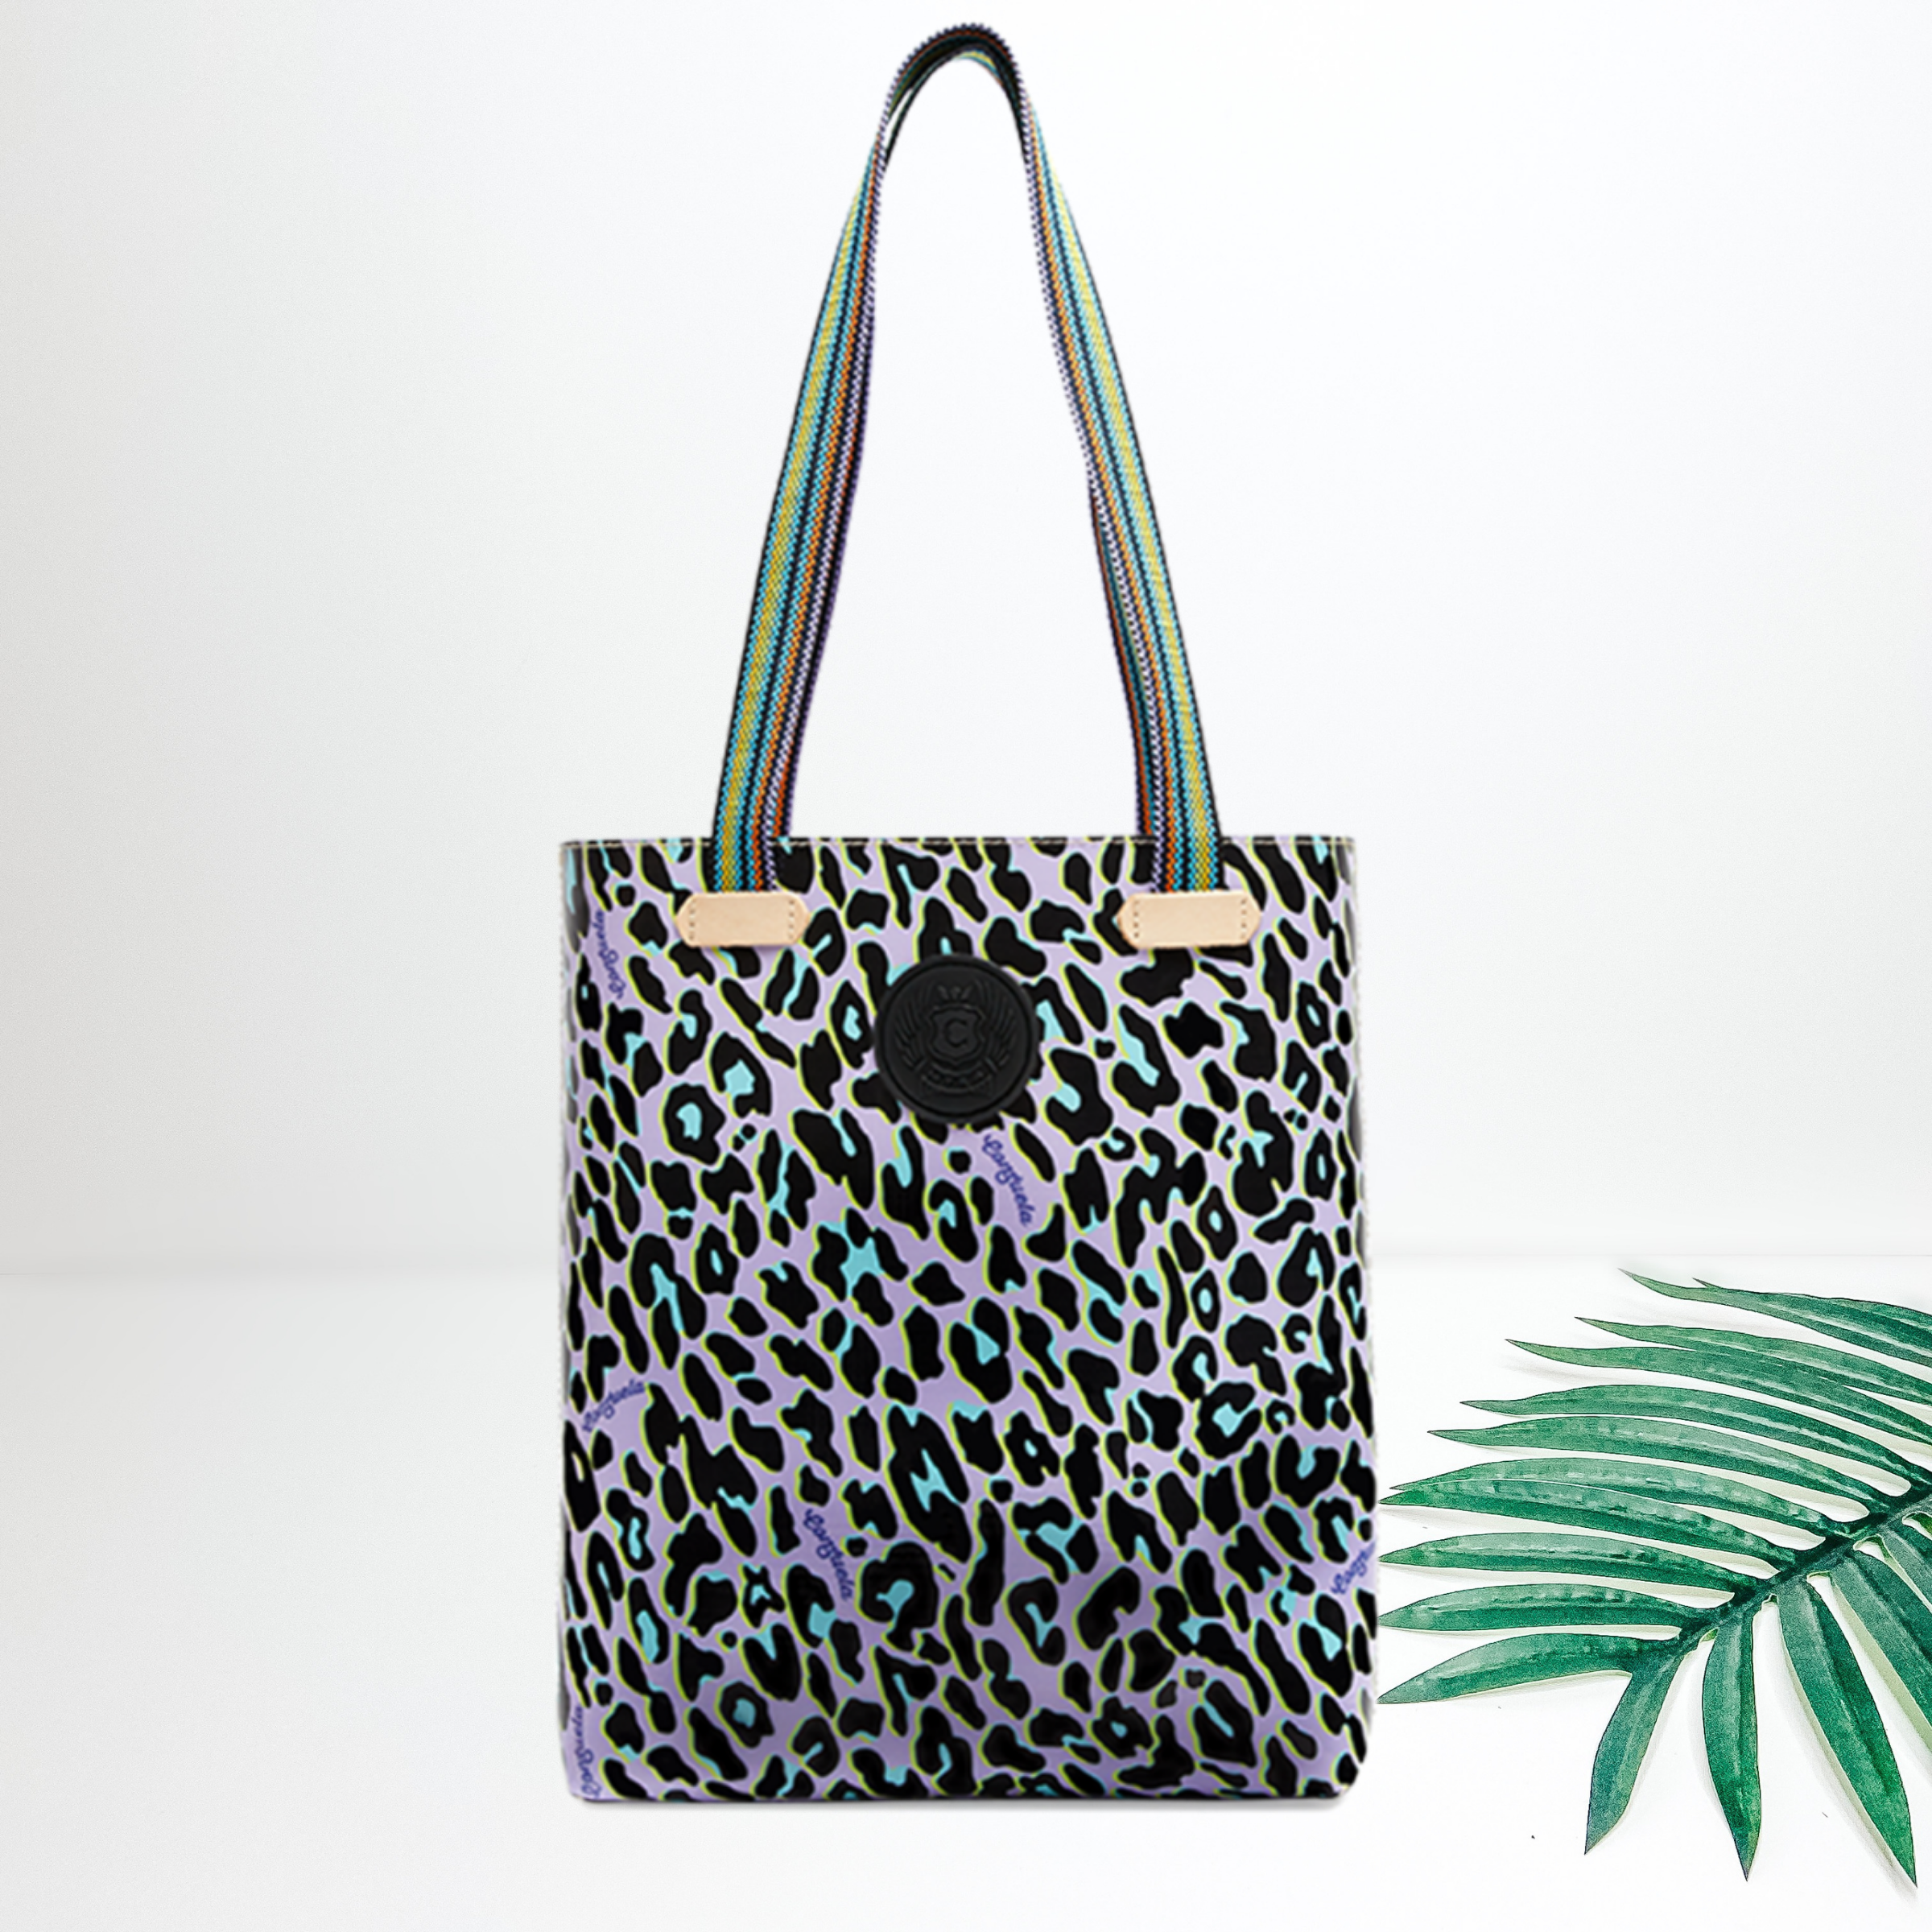 A large purple leopard print tote with long straps. Pictured on white background with a  palm leaf.